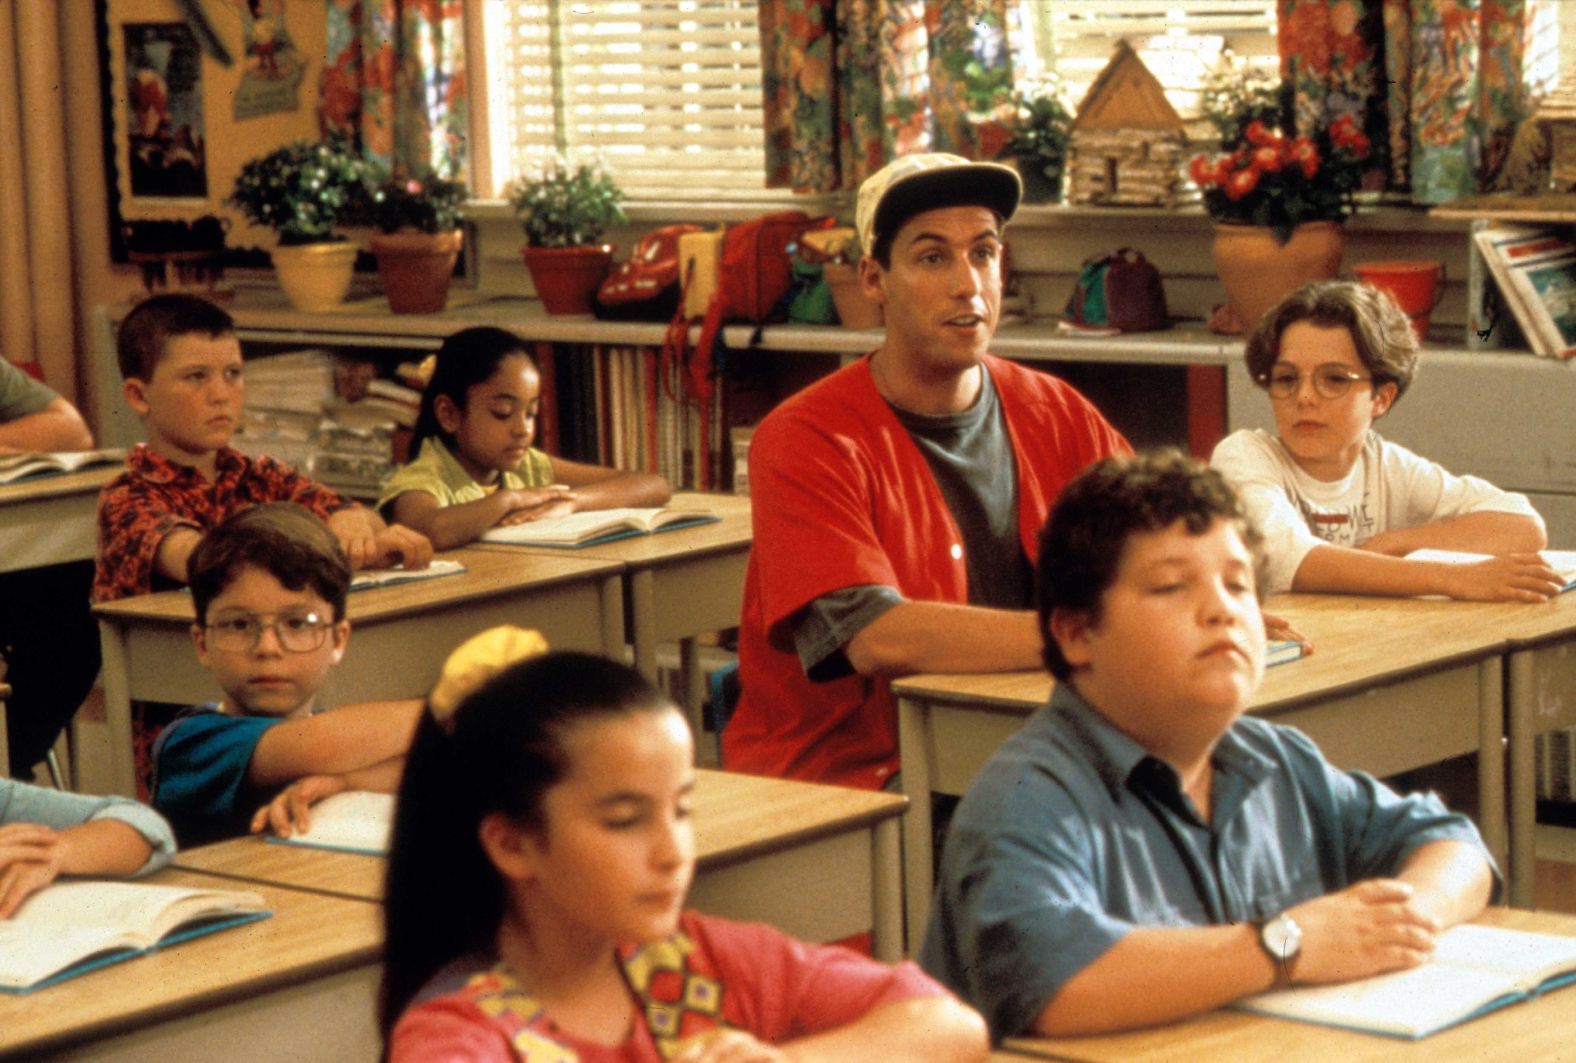 Sandler capitalized off his "SNL" fame to star in movies, including the 1995 film "Billy Madison."